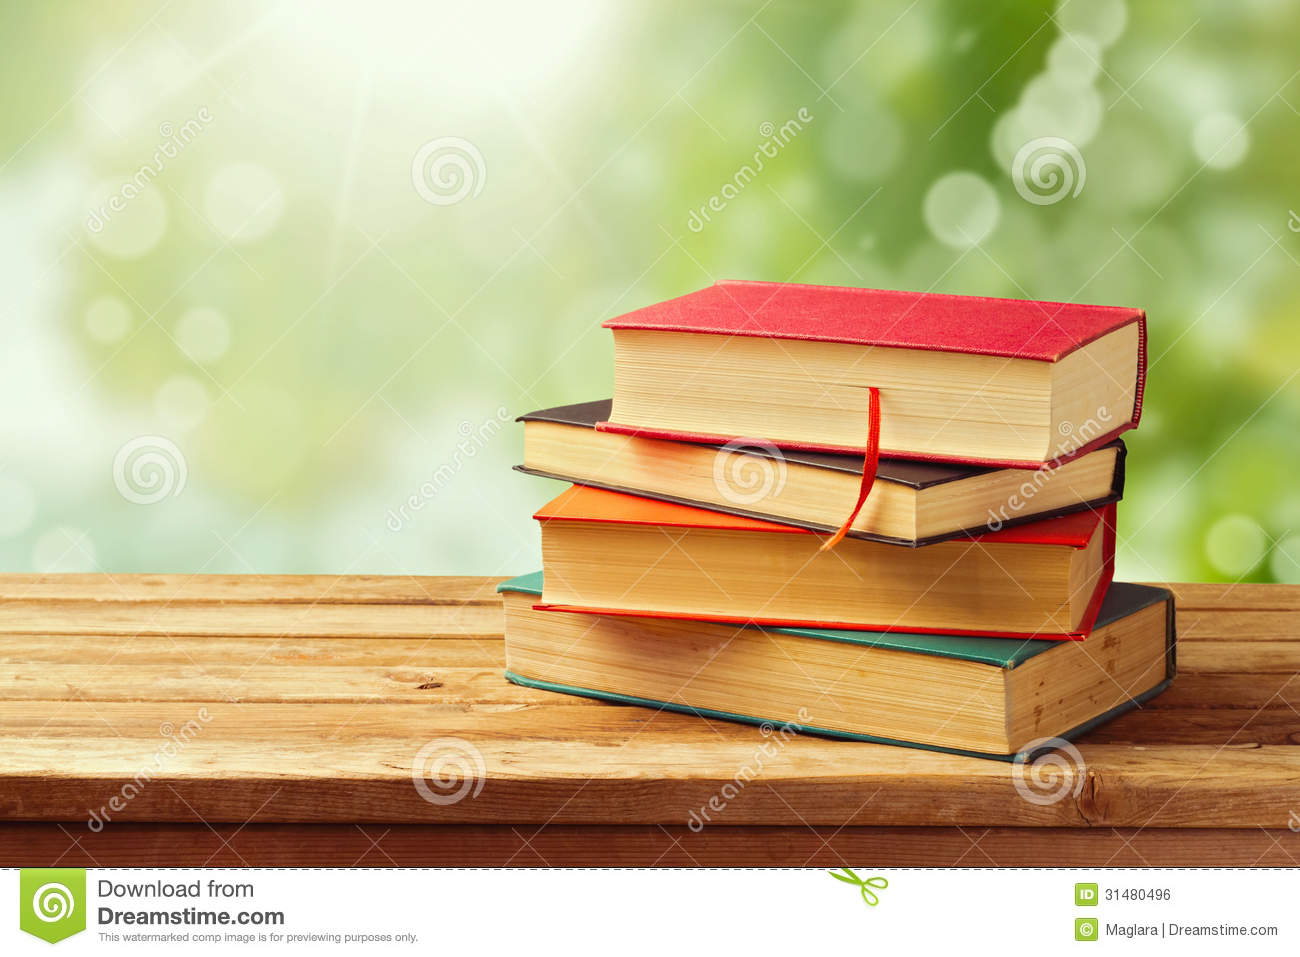 background images books #17